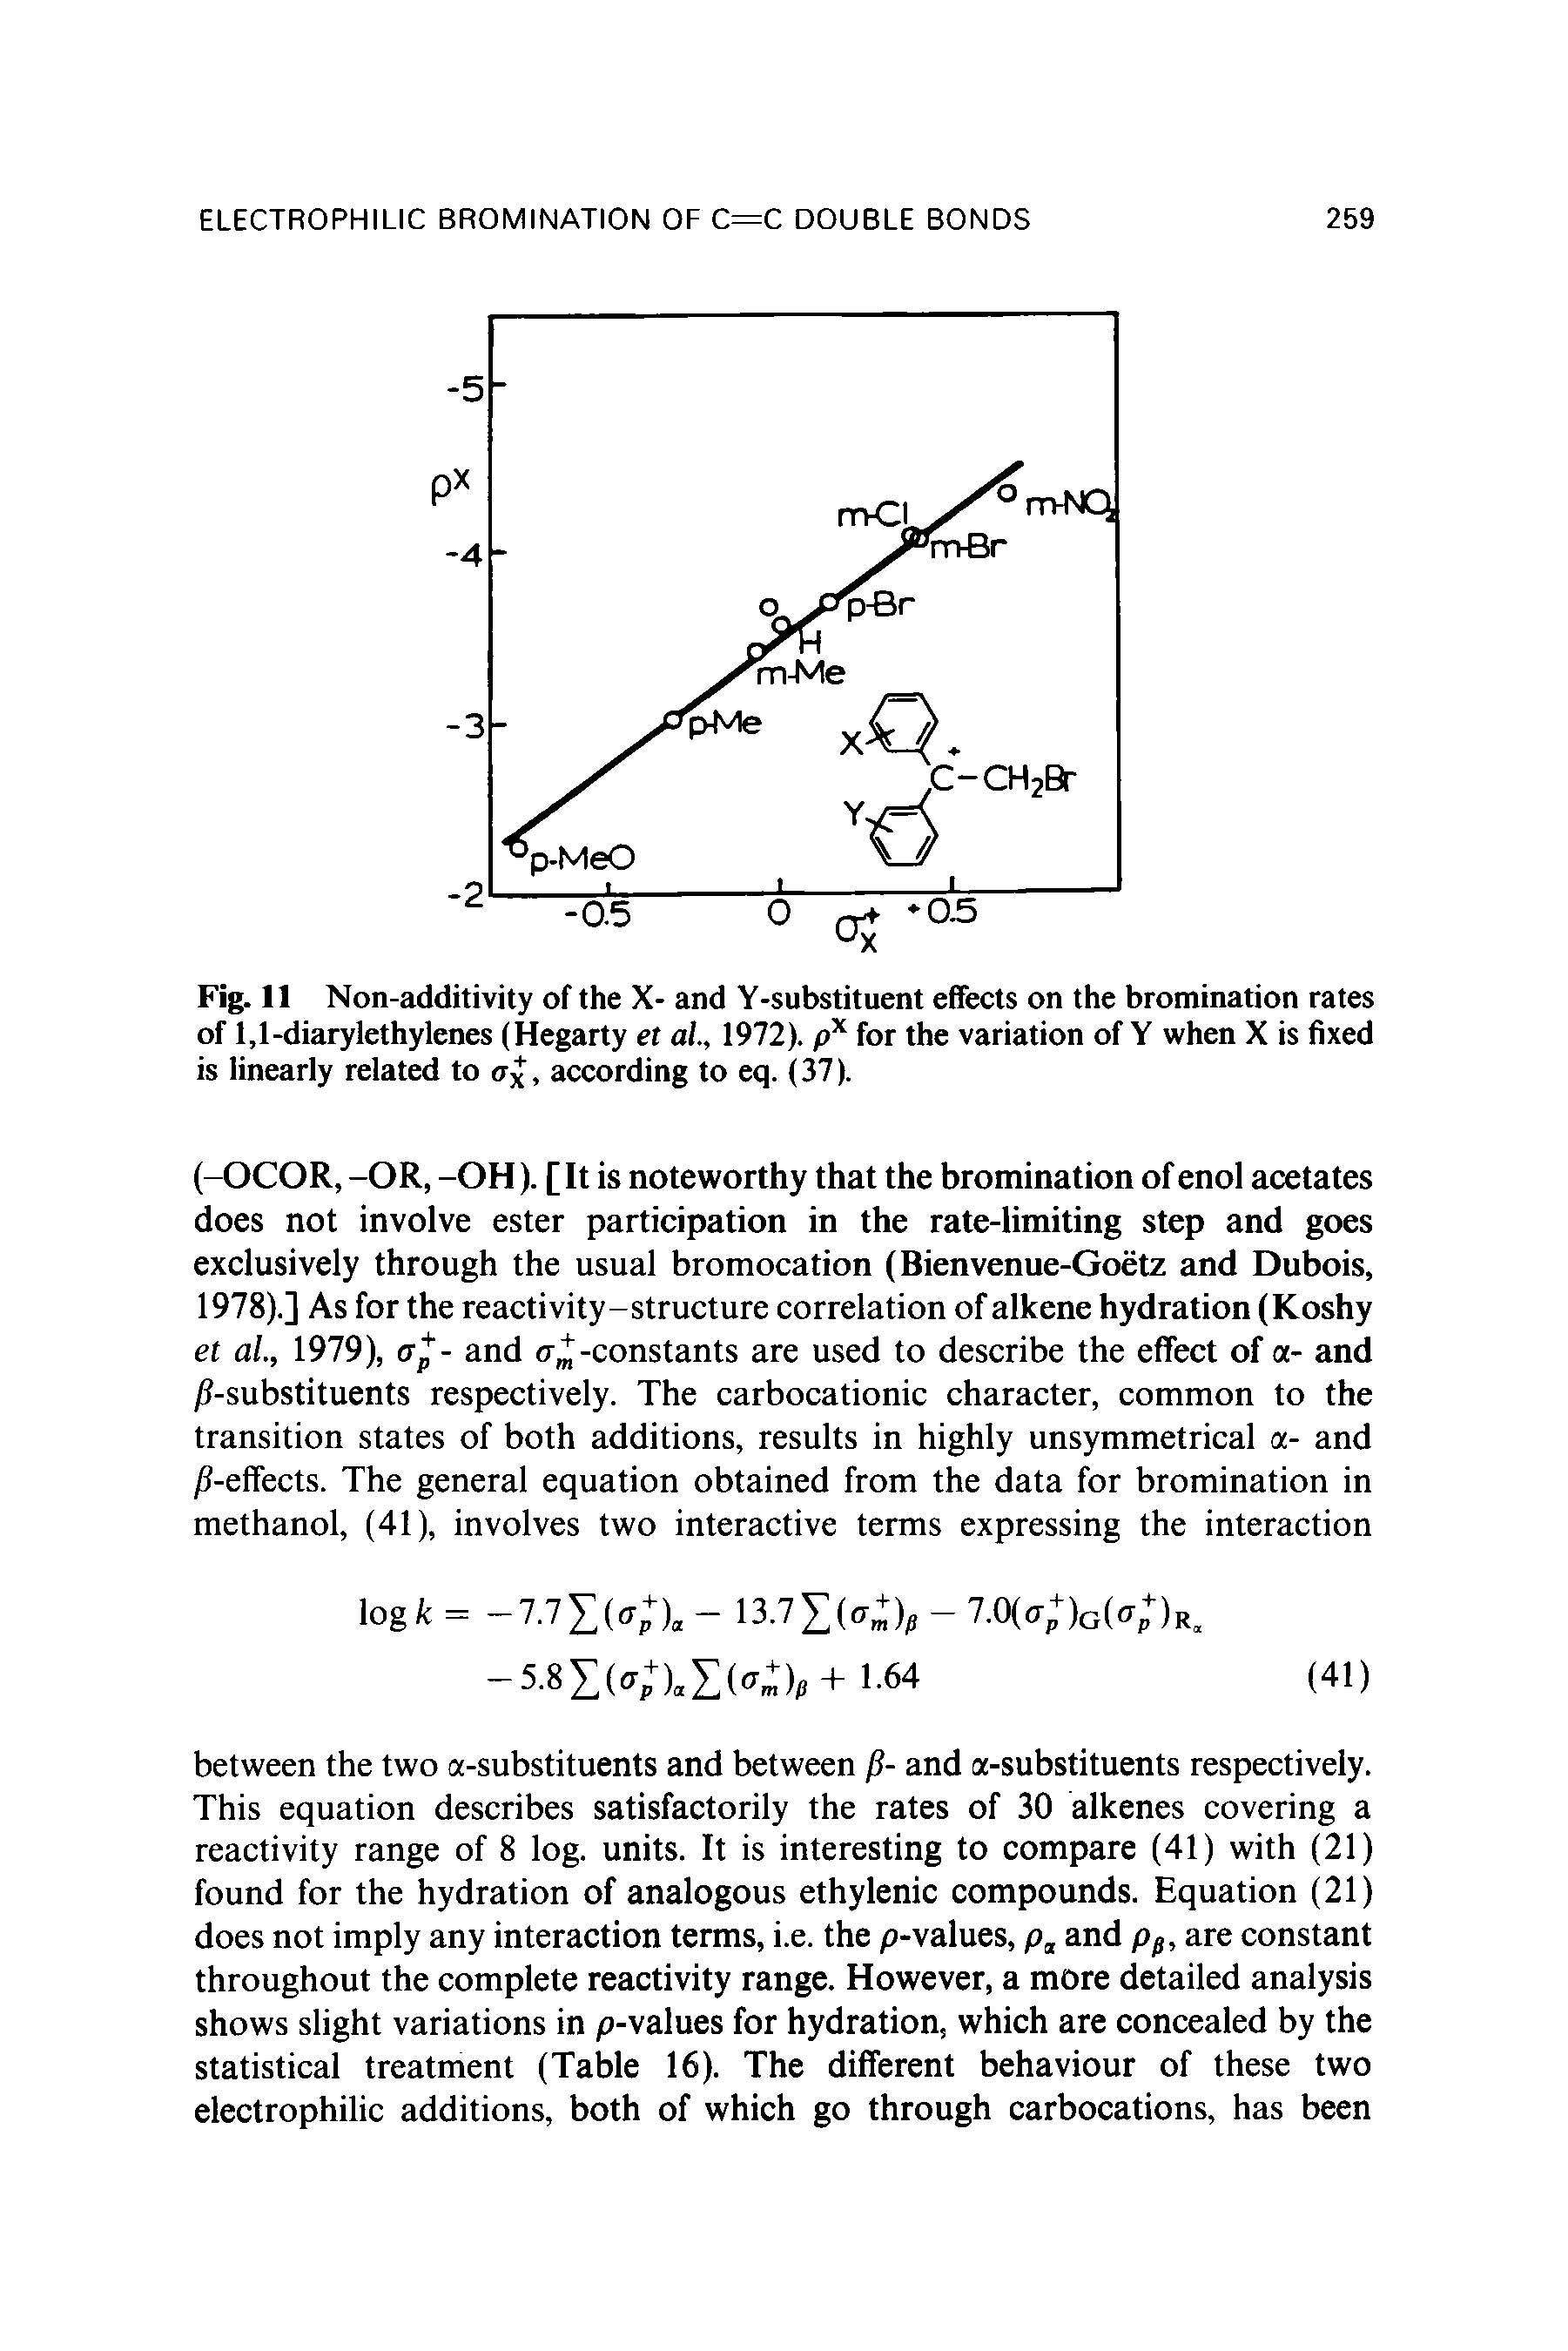 Fig. 11 Non-additivity of the X- and Y-substituent effects on the bromination rates of 1,1-diarylethylenes (Hegarty et al., 1972). px for the variation of Y when X is fixed is linearly related to <7, according to eq. (37).